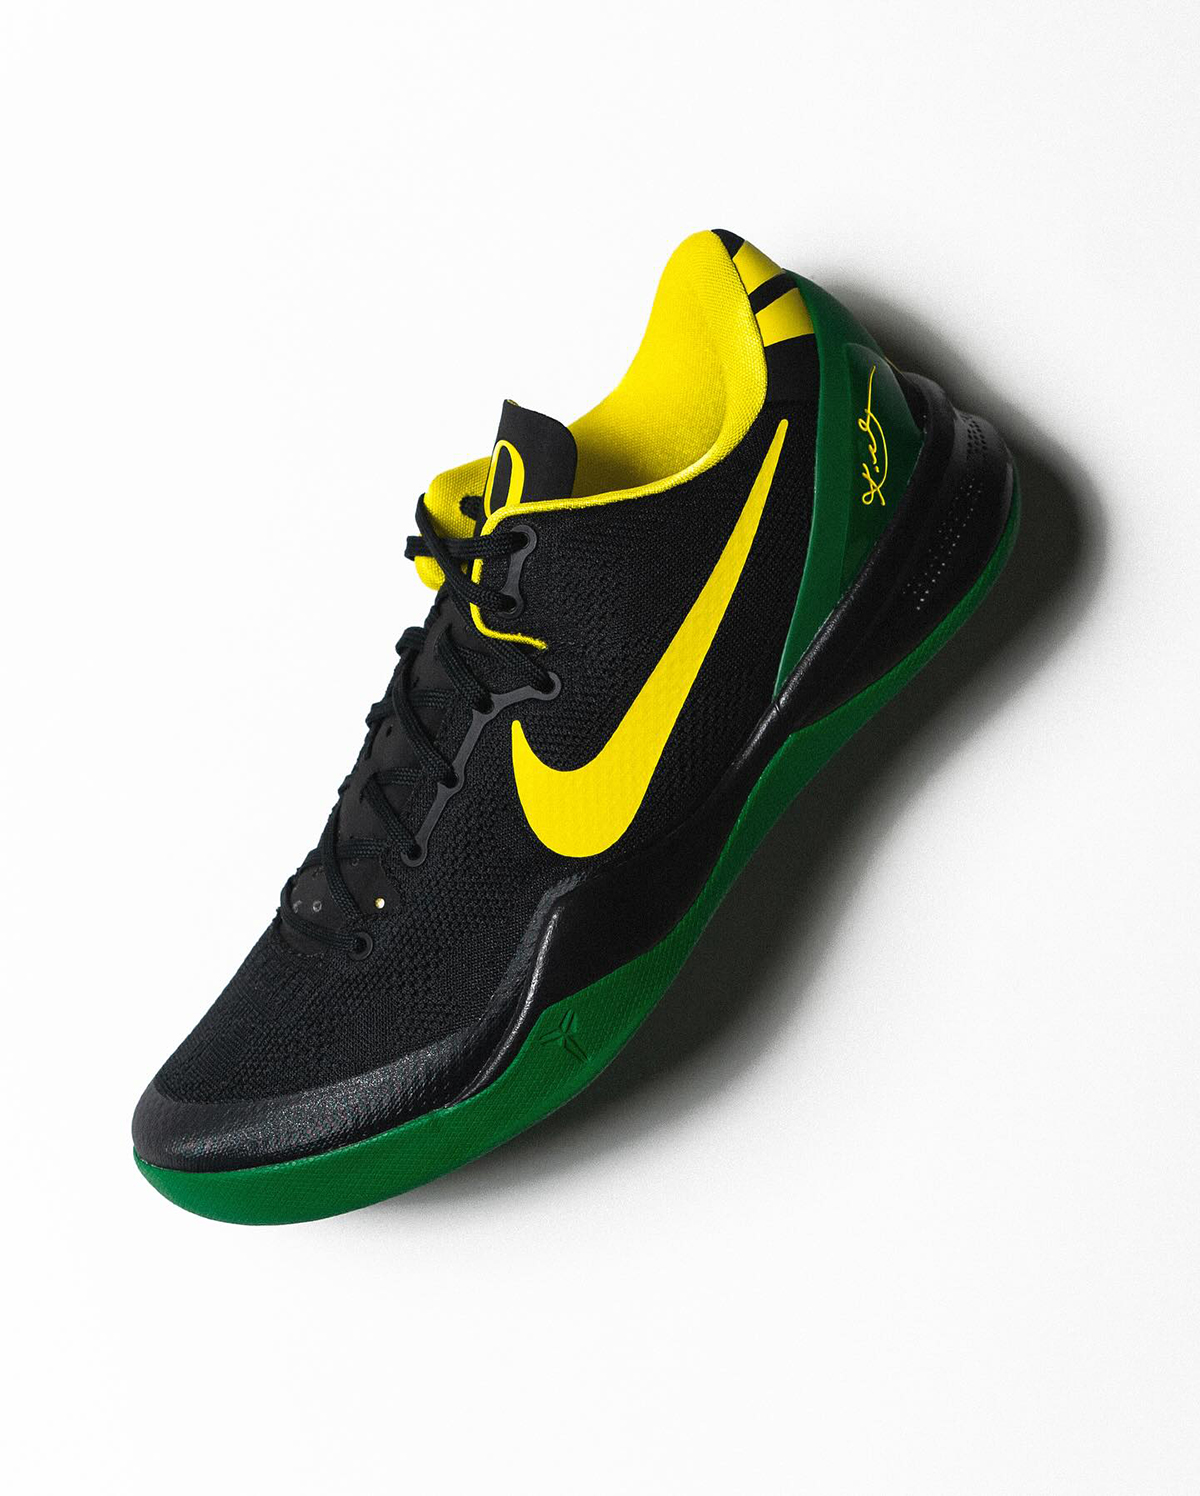 Kyrie Irving has a special connection to number 11 Protro Oregon Ducks Pe 2